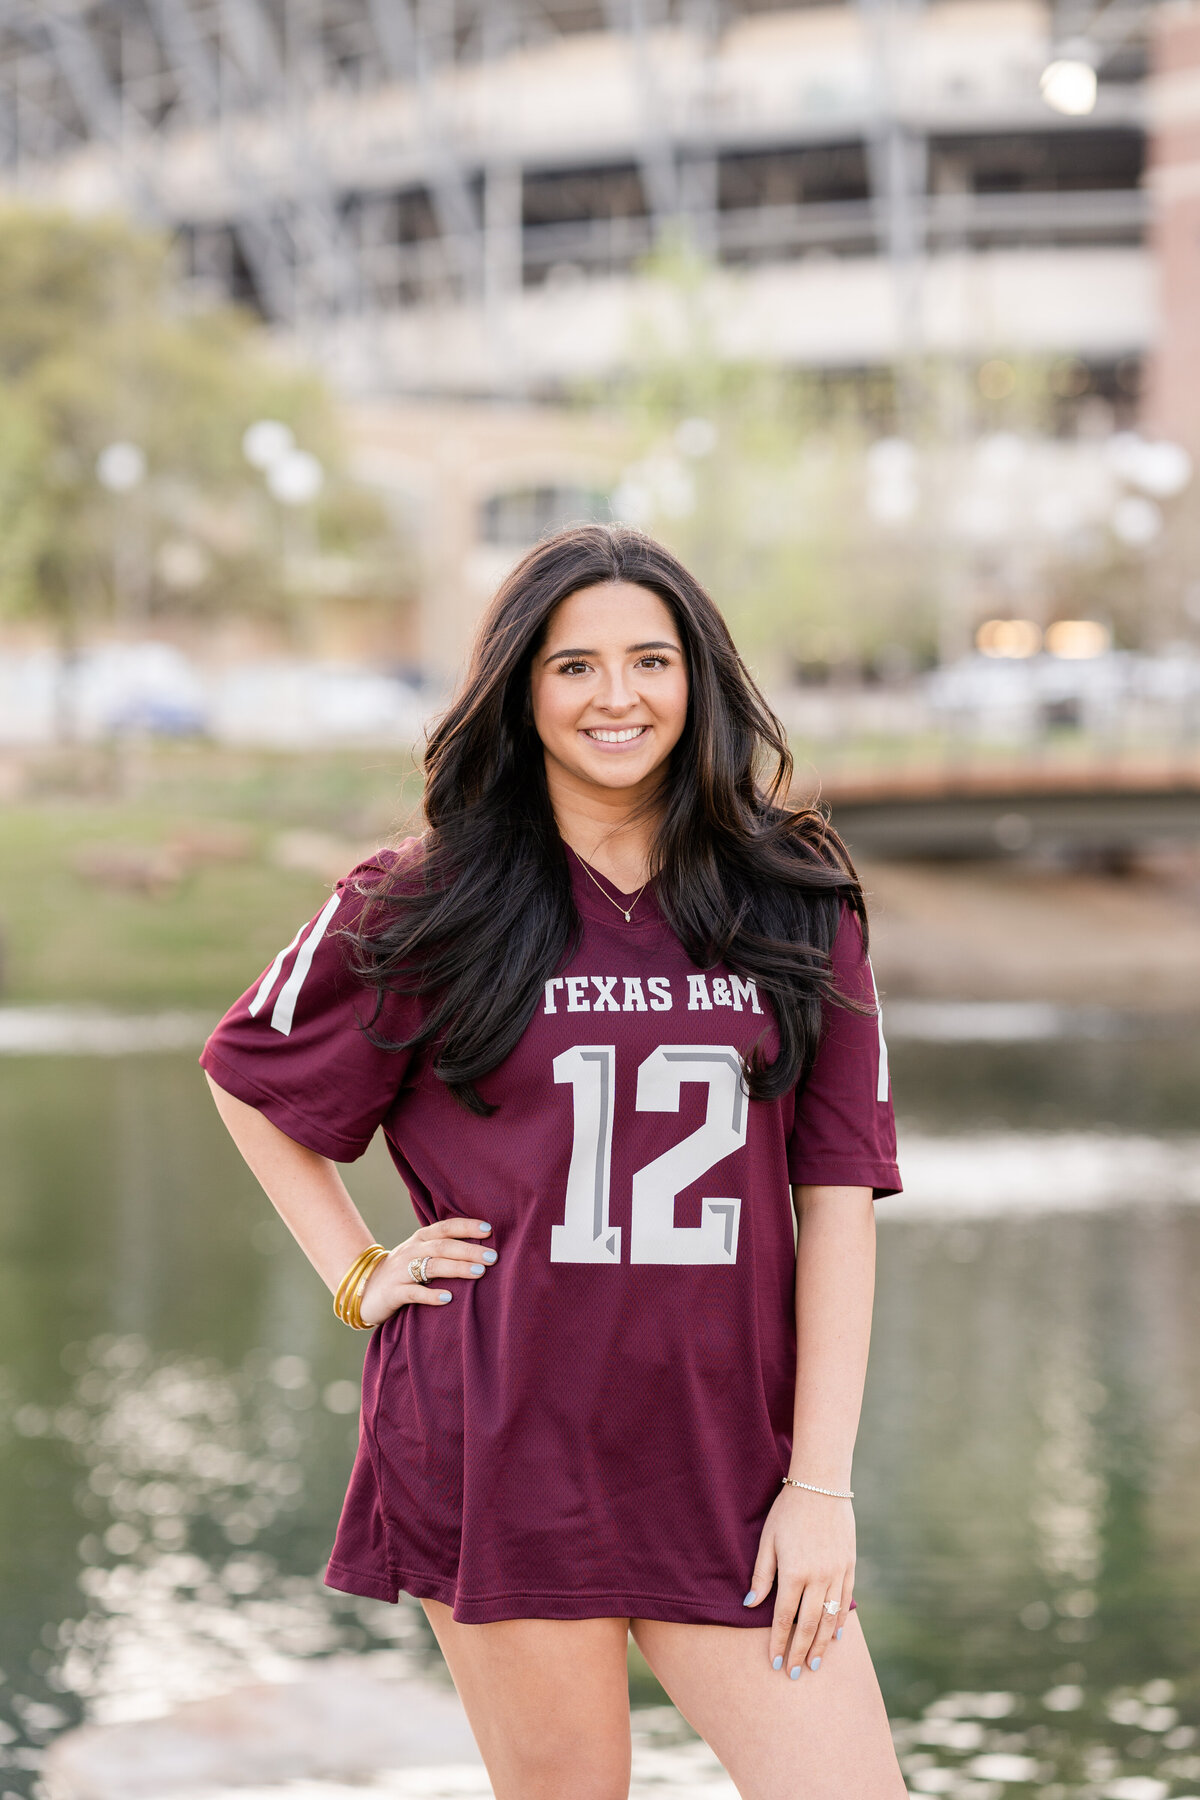 Texas A&M senior girl smiling with hand on hip and wearing maroon jersey at Aggie Park